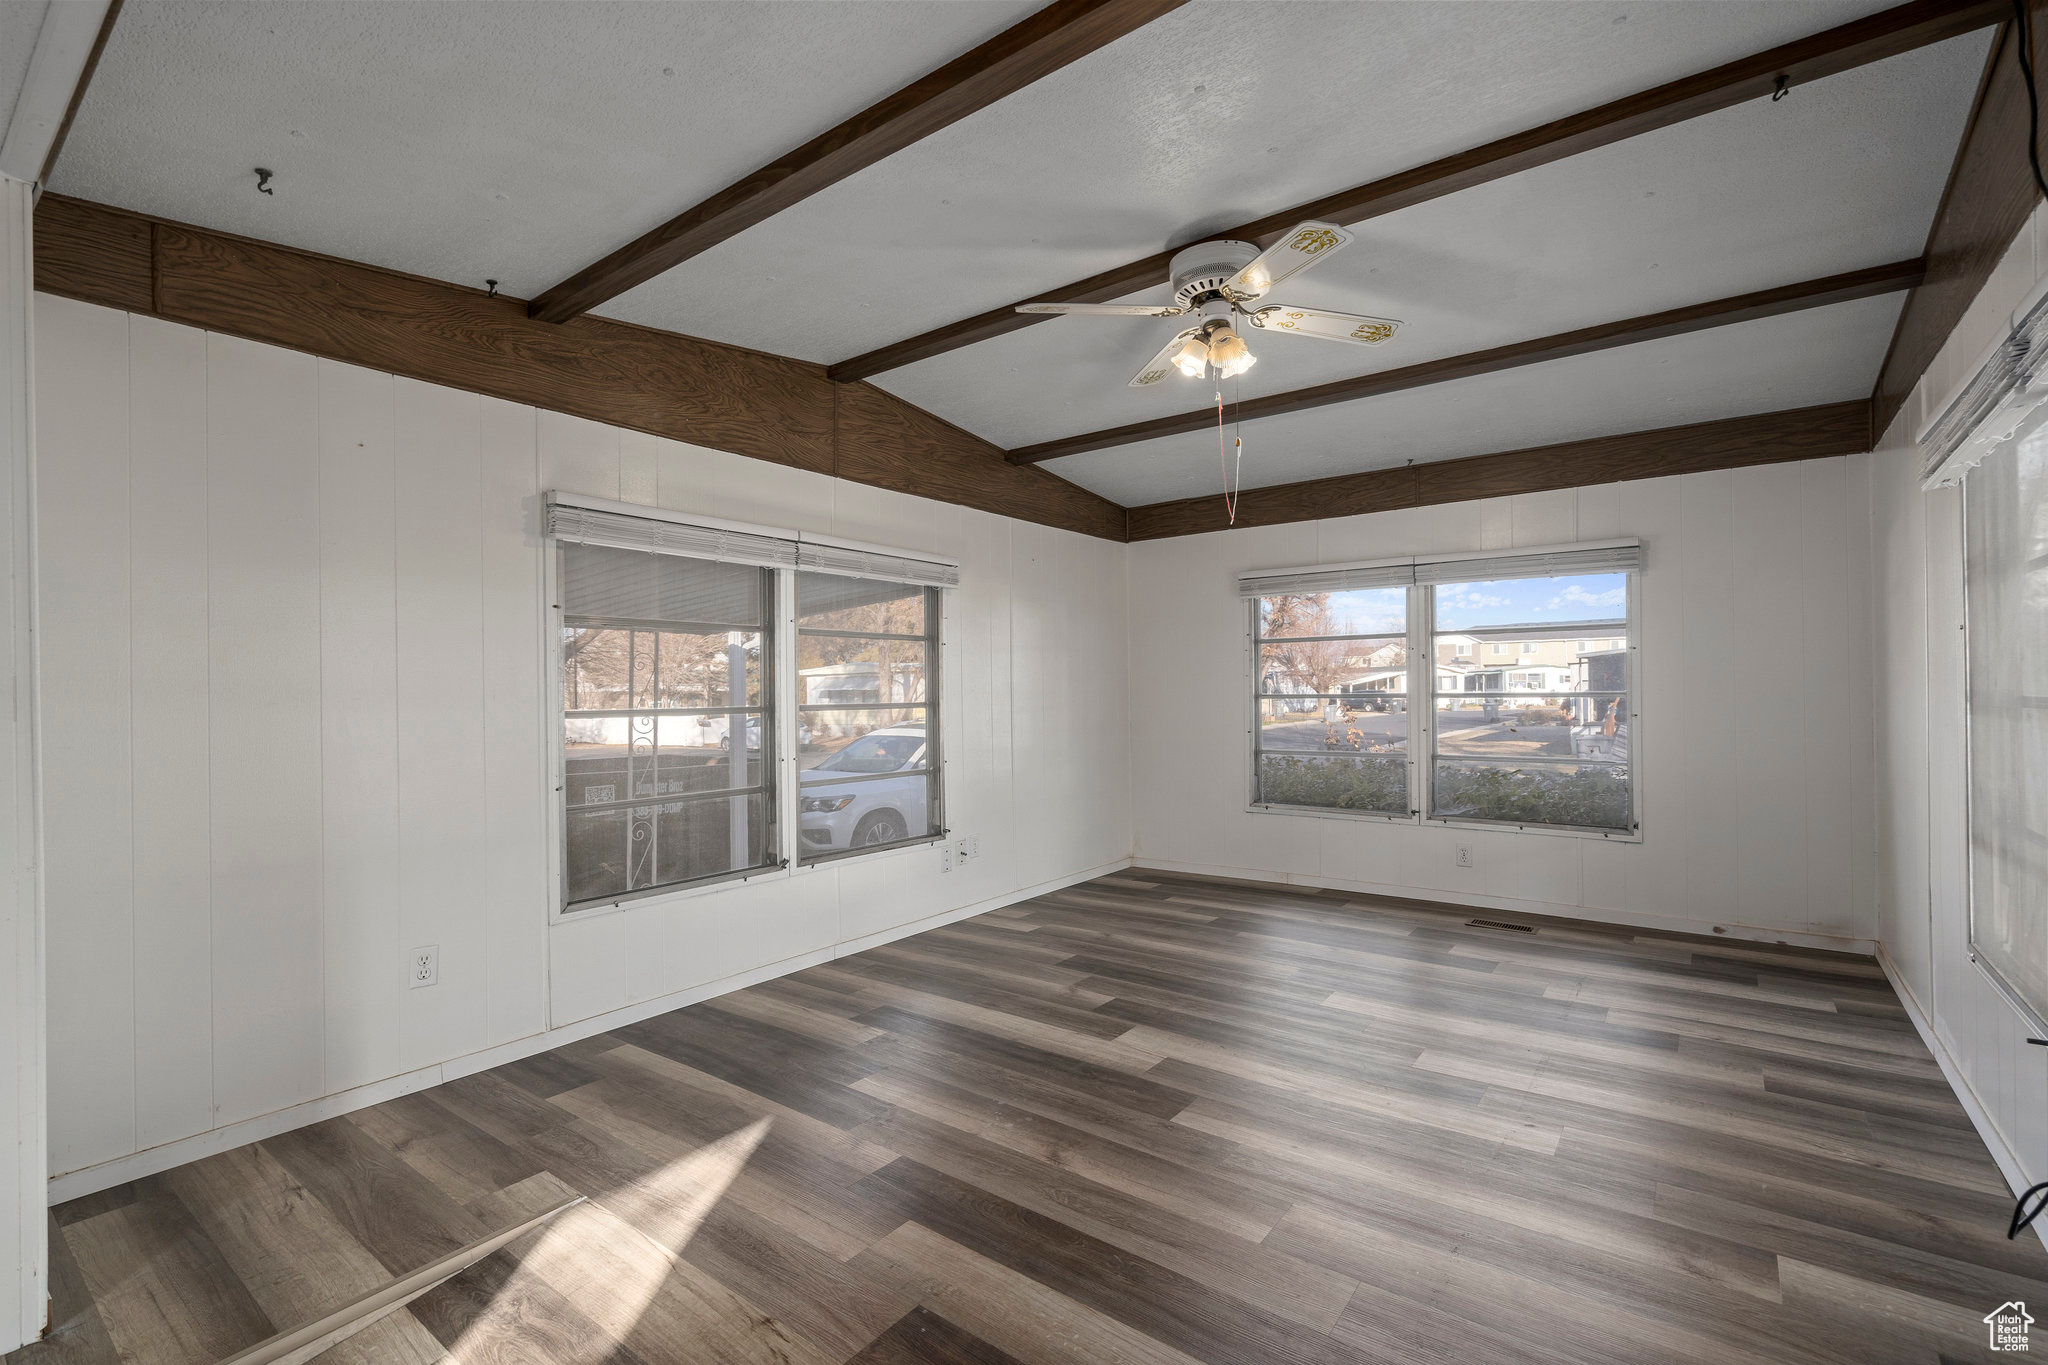 Unfurnished room with dark hardwood / wood-style flooring, vaulted ceiling with beams, and ceiling fan